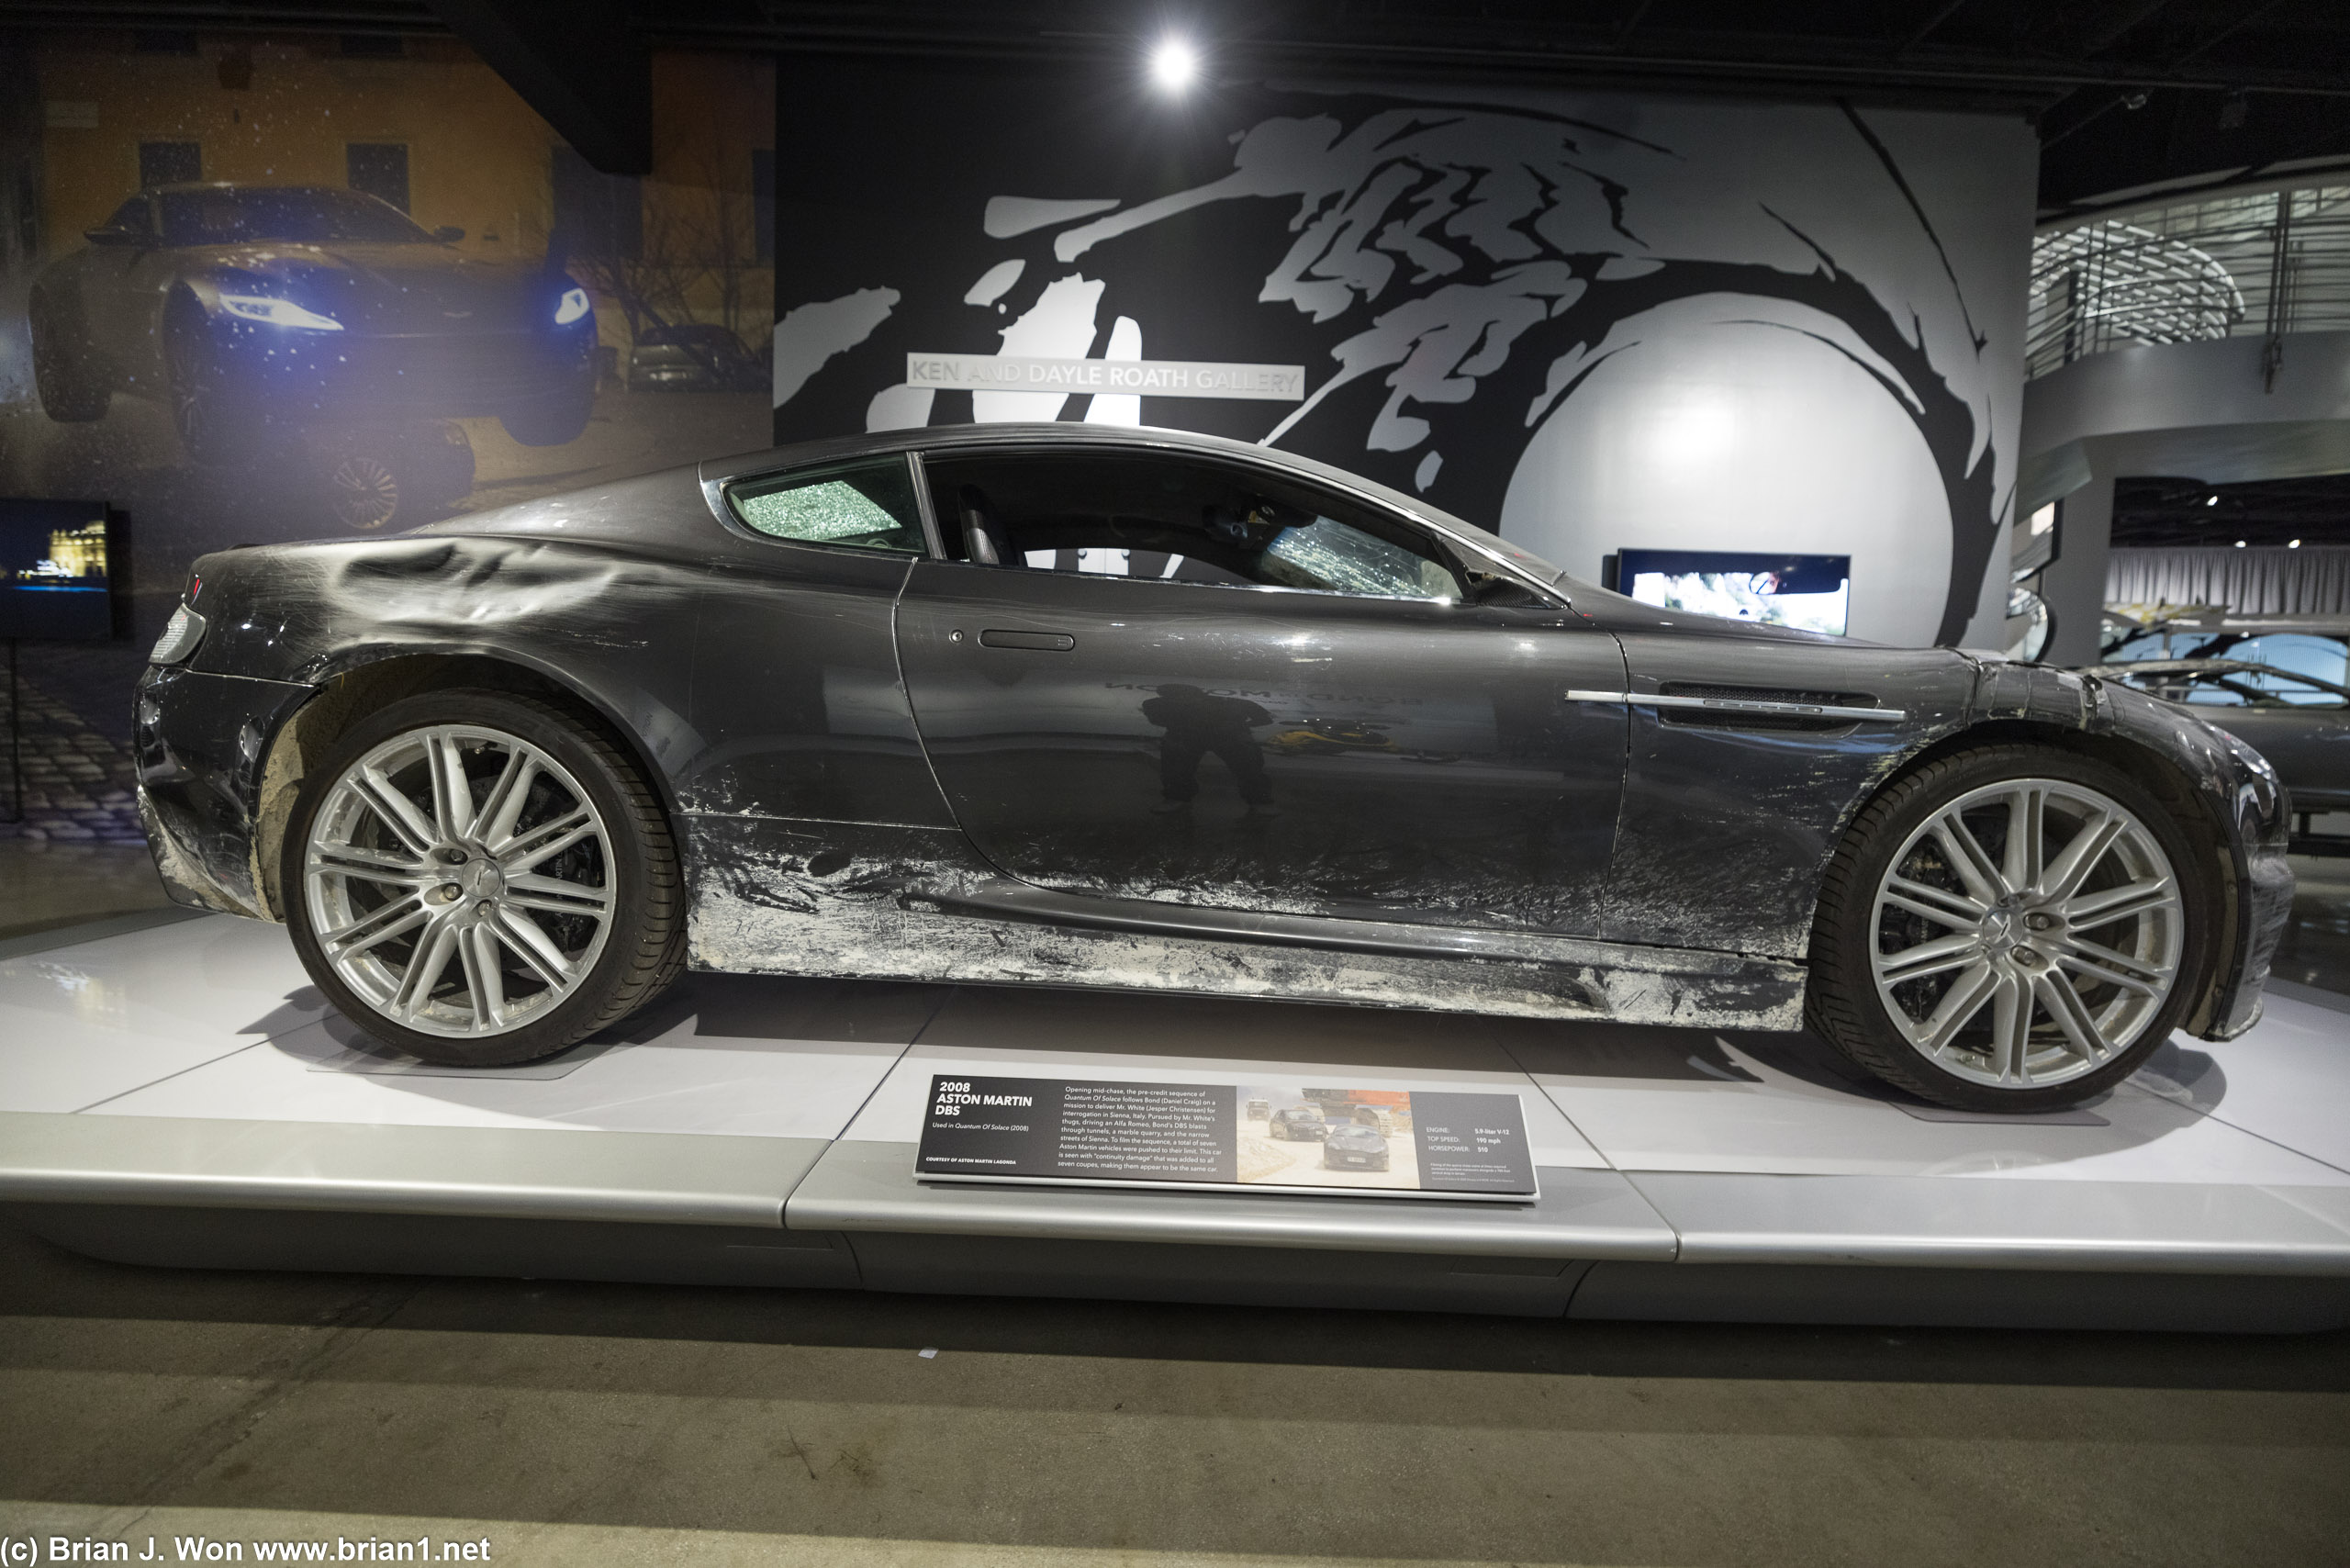 2008 Aston Martin DBS from Quantum of Solace.